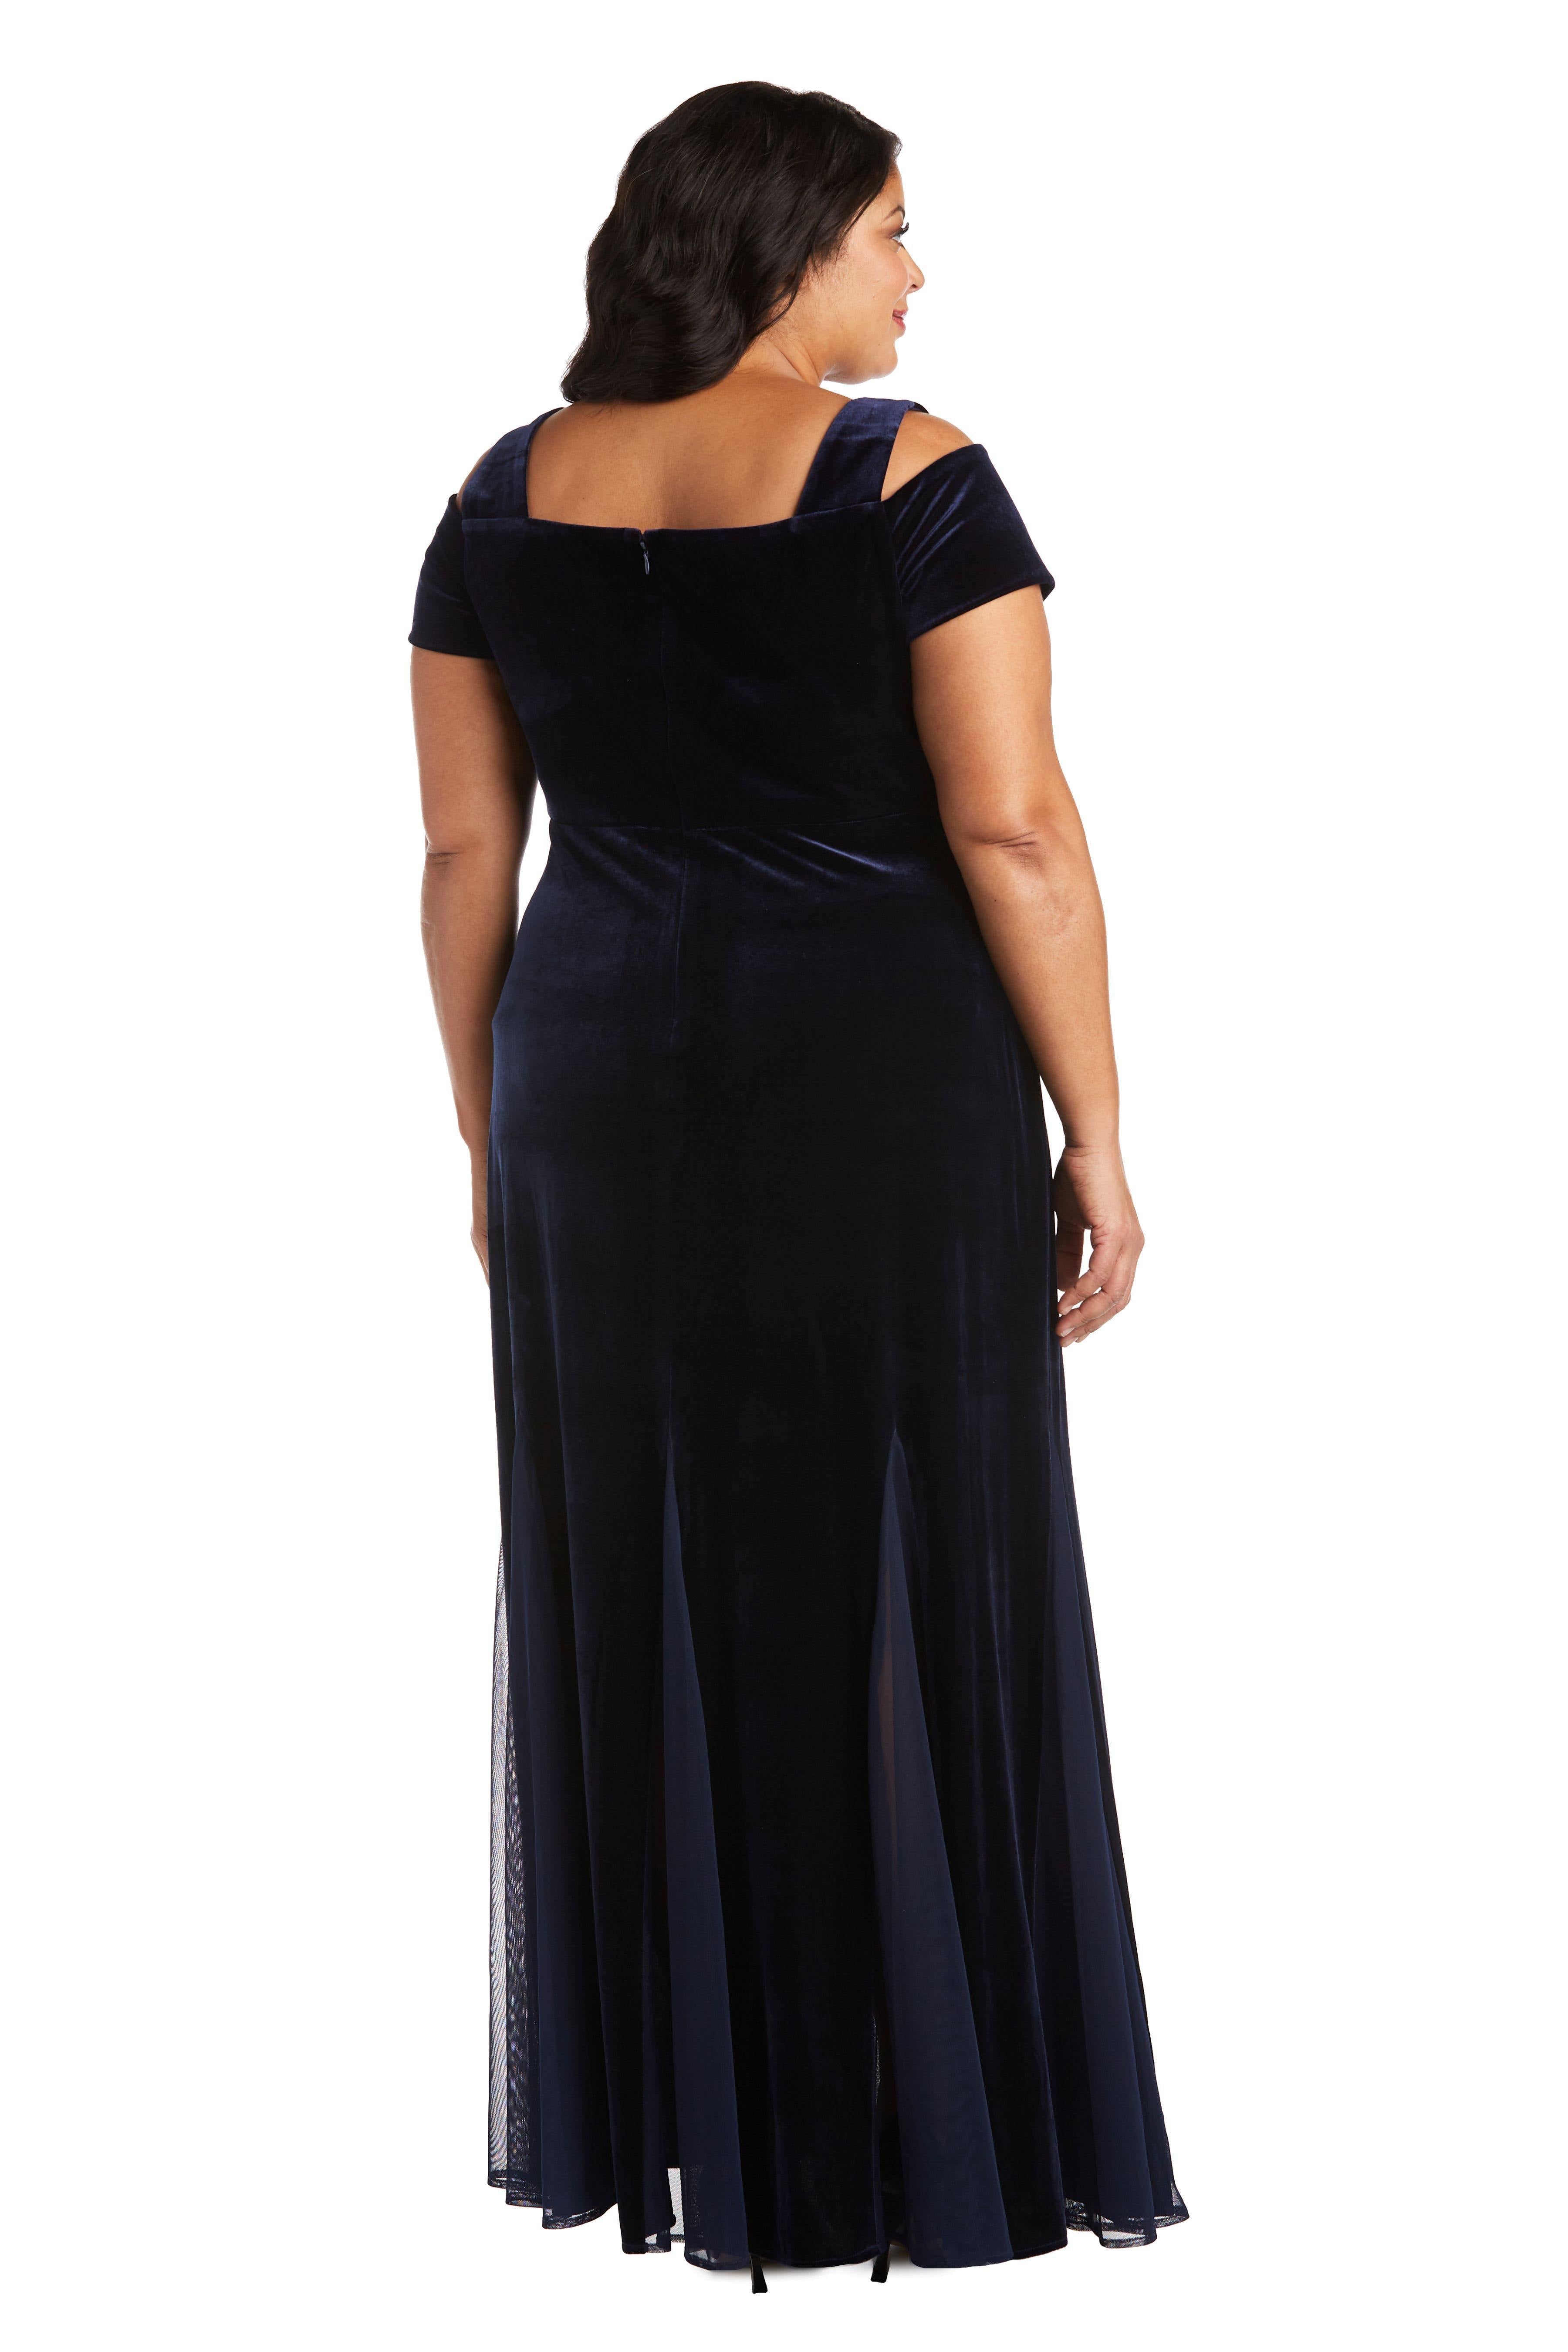 Nightway Long Plus Size Velvet Dress 21999W for $84.99 – The Dress Outlet